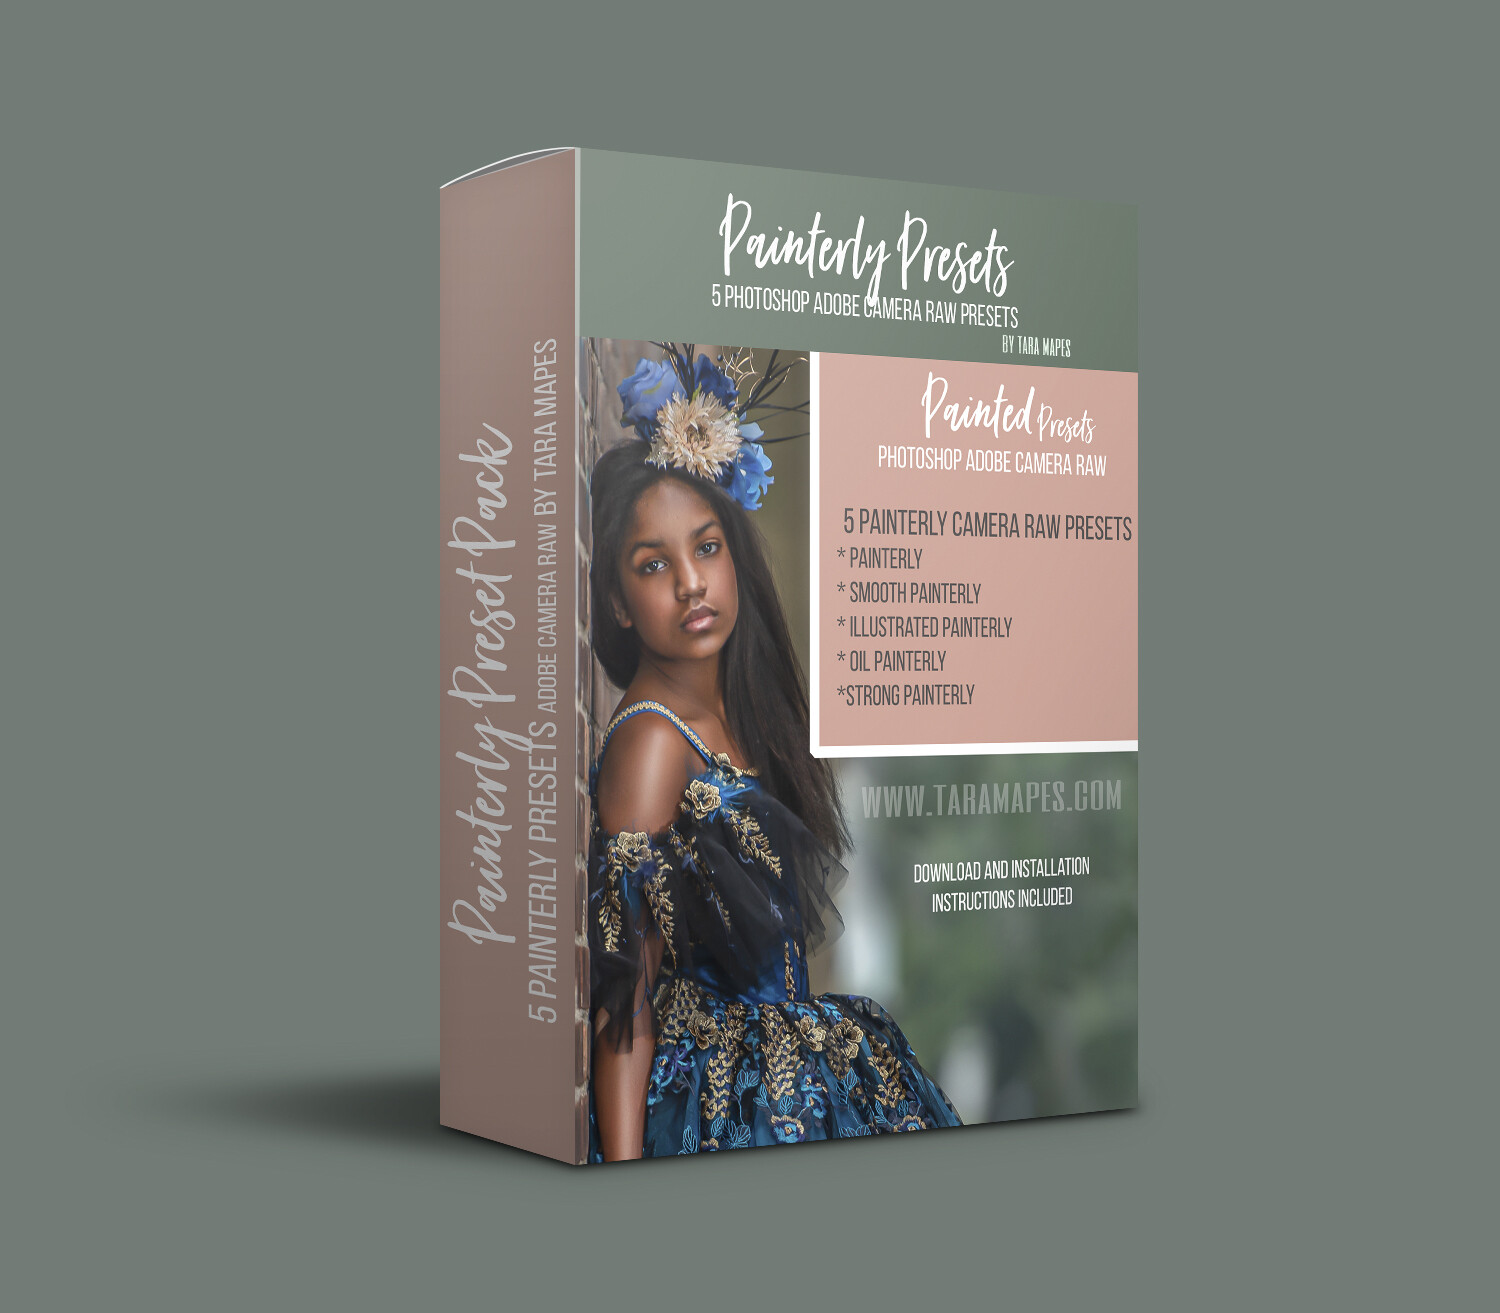 Painterly Preset Pack: Adobe Camera Raw Presets: 5 Painterly Photoshop Presets with Installation instructions - Video Demo in Description